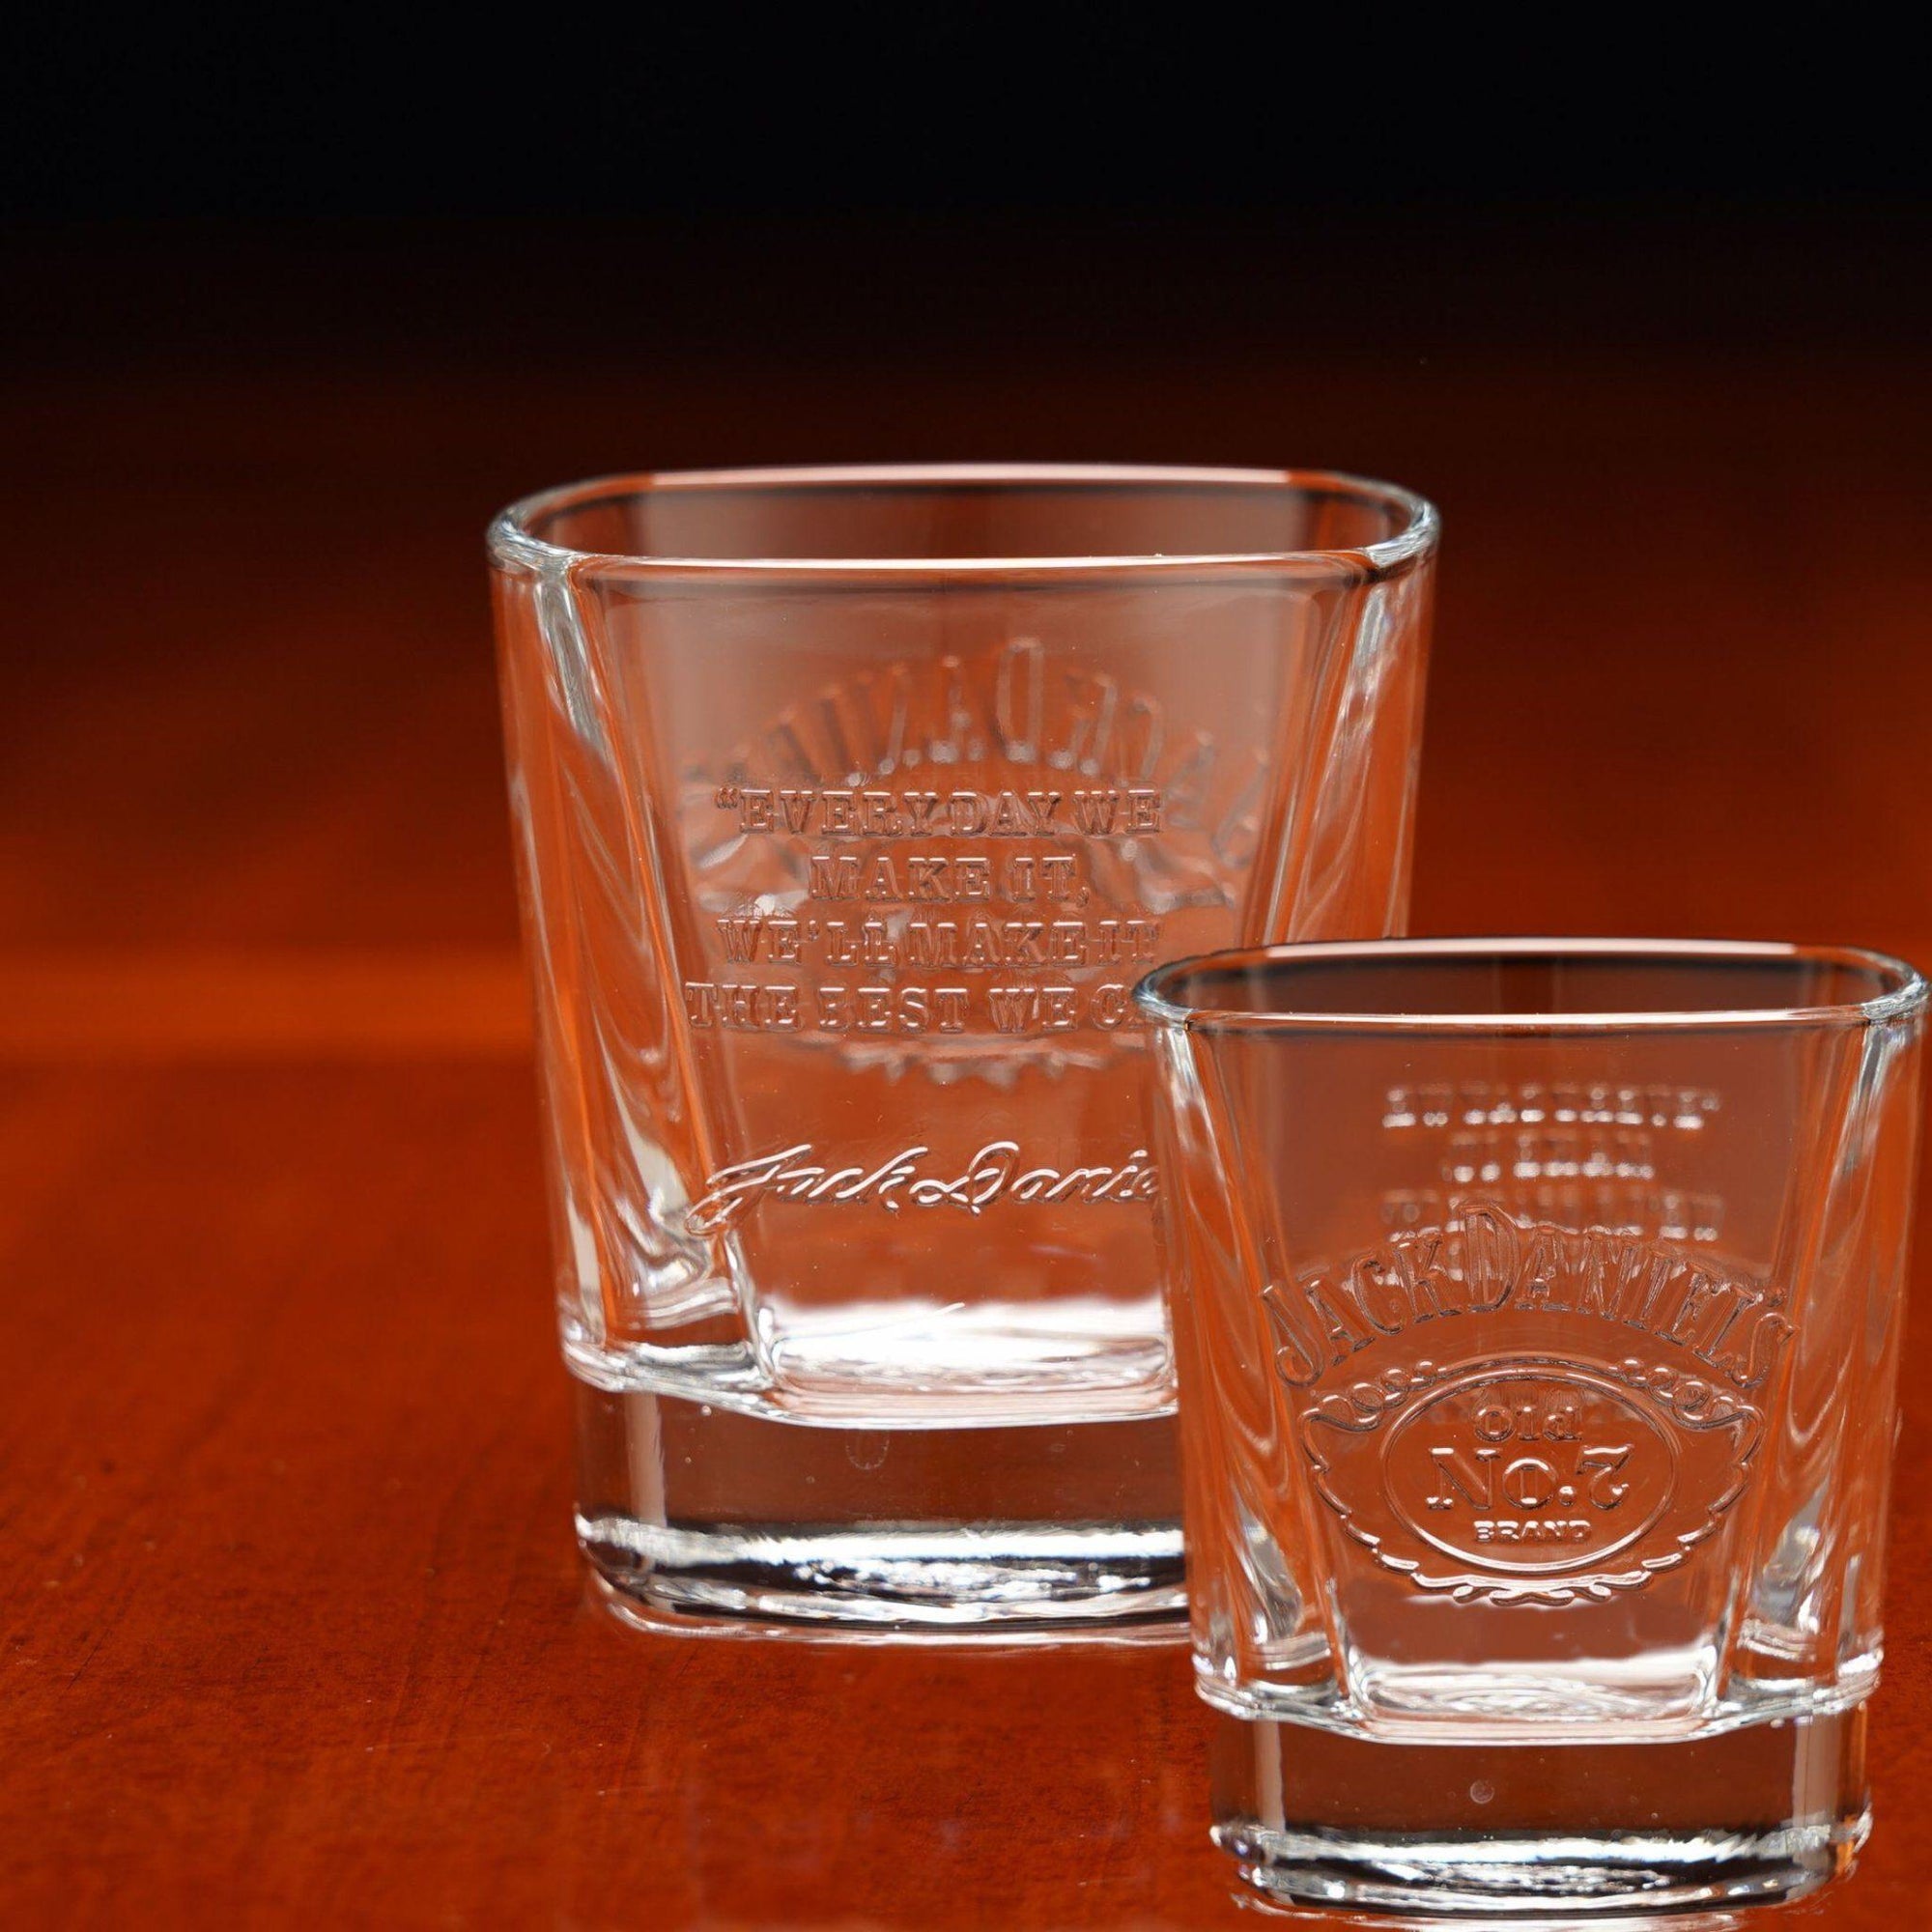 Jack Daniel's Every Day We Make It Swing Logo Glass - The Whiskey Cave